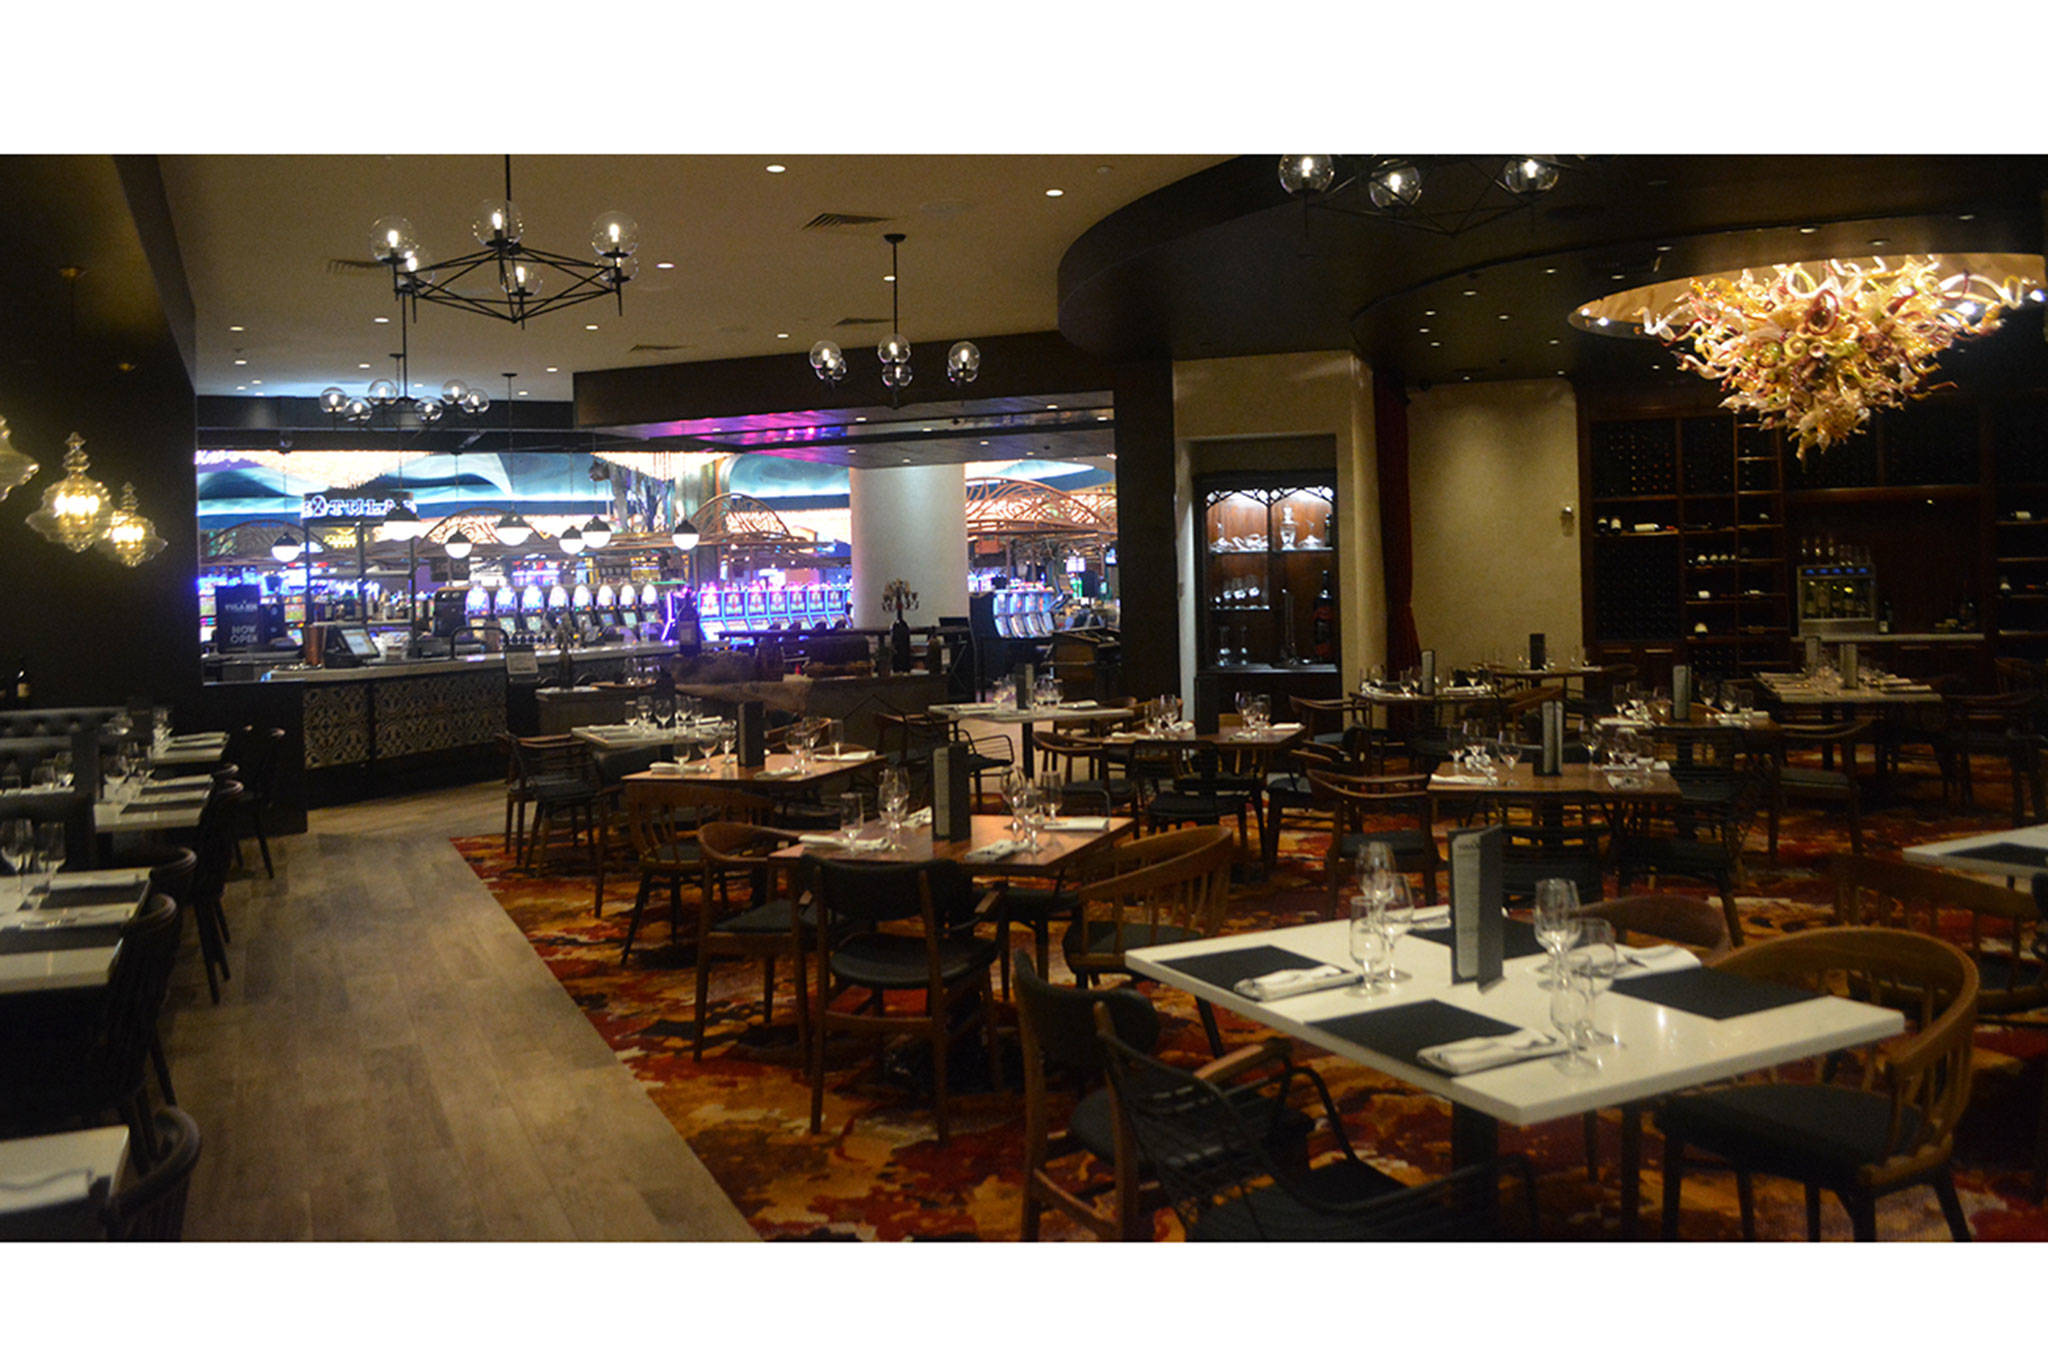 What customers want customers get in pasta, steaks at Tulalip’s new Tula Bene restaurant (slide show)